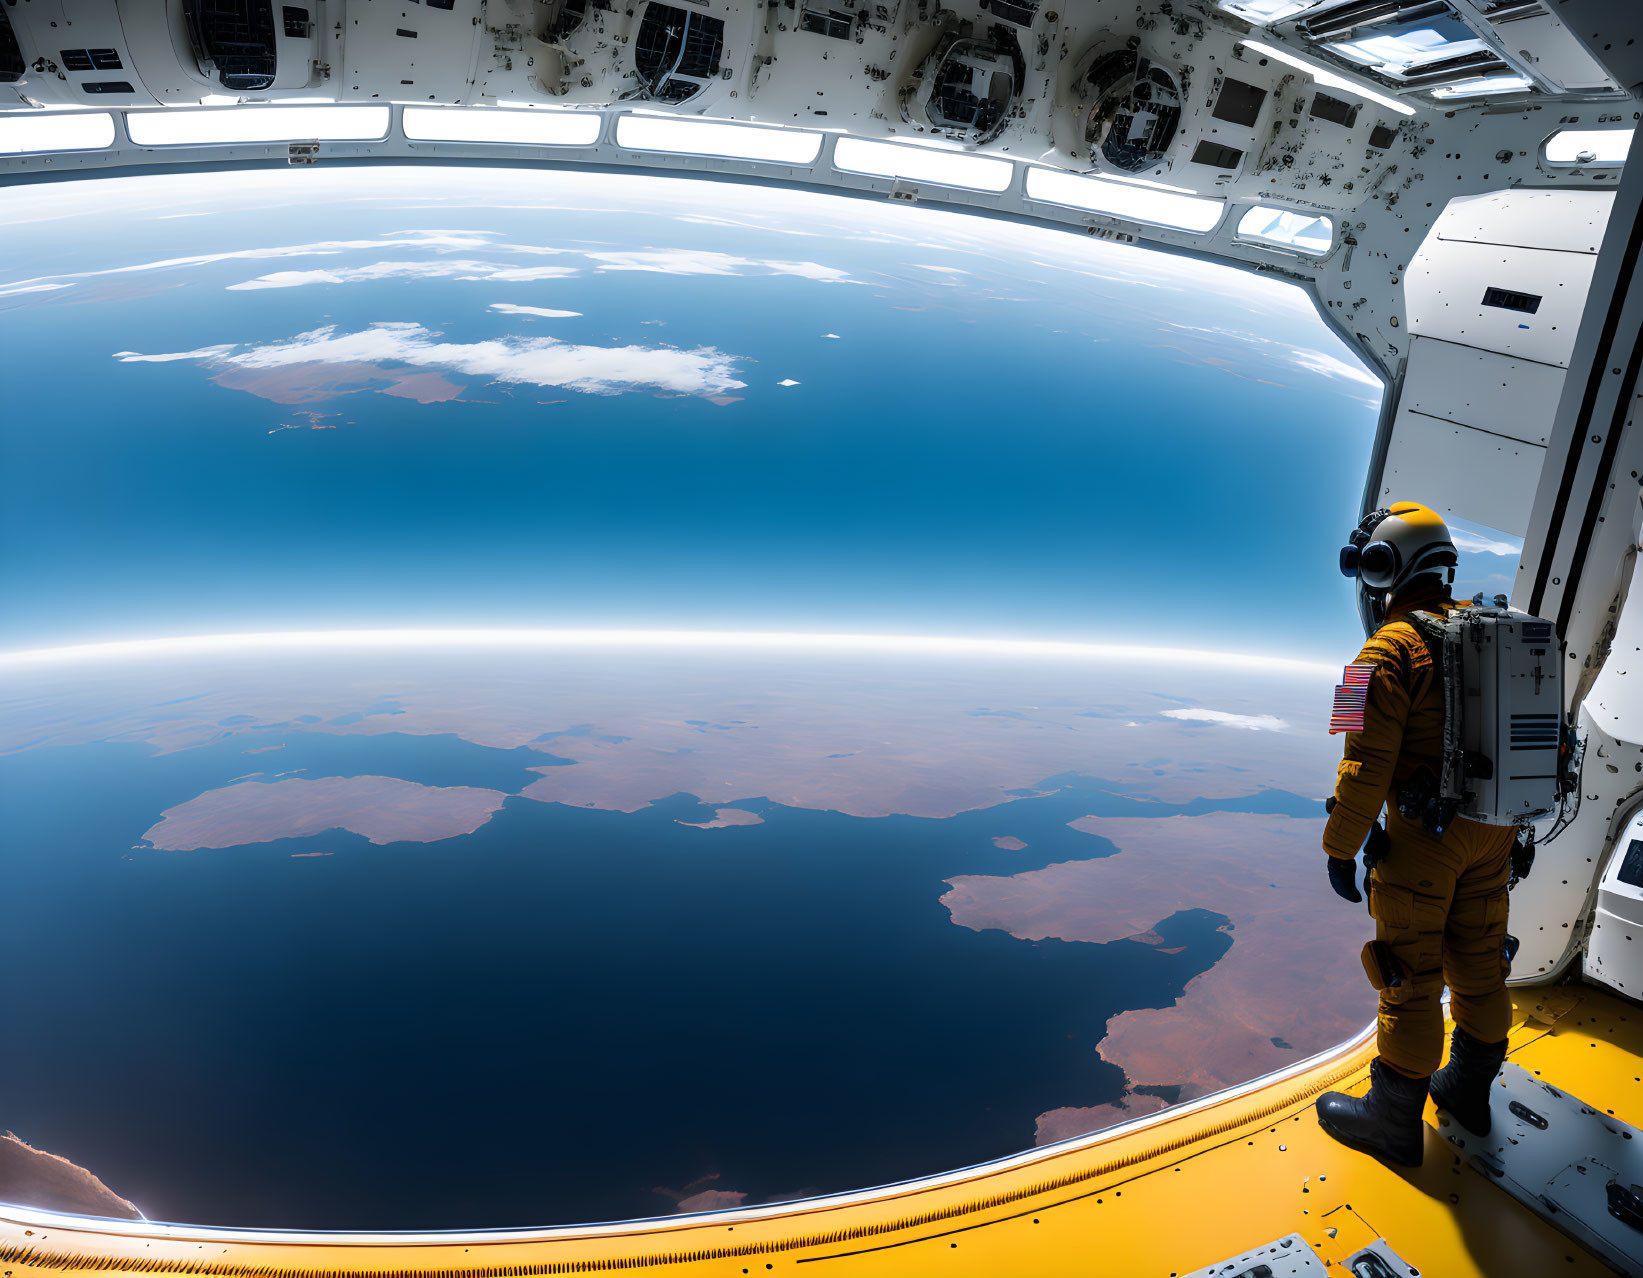 Astronaut viewing Earth from spacecraft window